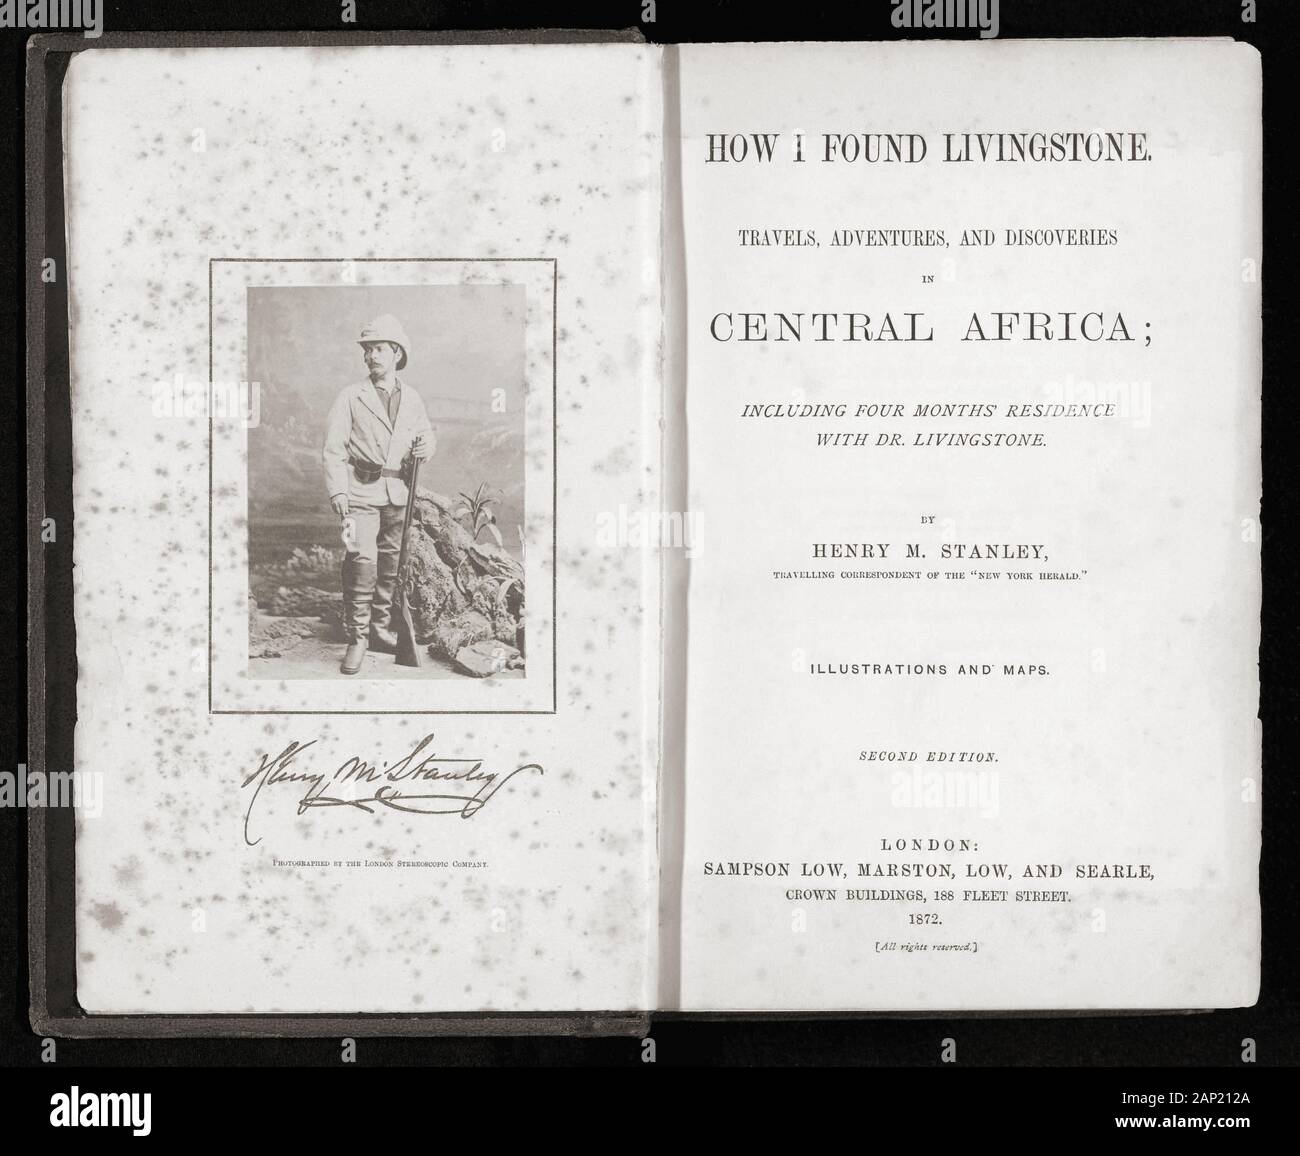 How I Found Livingstone.  Travels, Adventures and Discoveries in Central Africa; Including Four Months Residence with Dr. Livingstone by Henry M. Stanley.  Title page of second edition of Stanley’s popular and successful book published 1872. Stock Photo